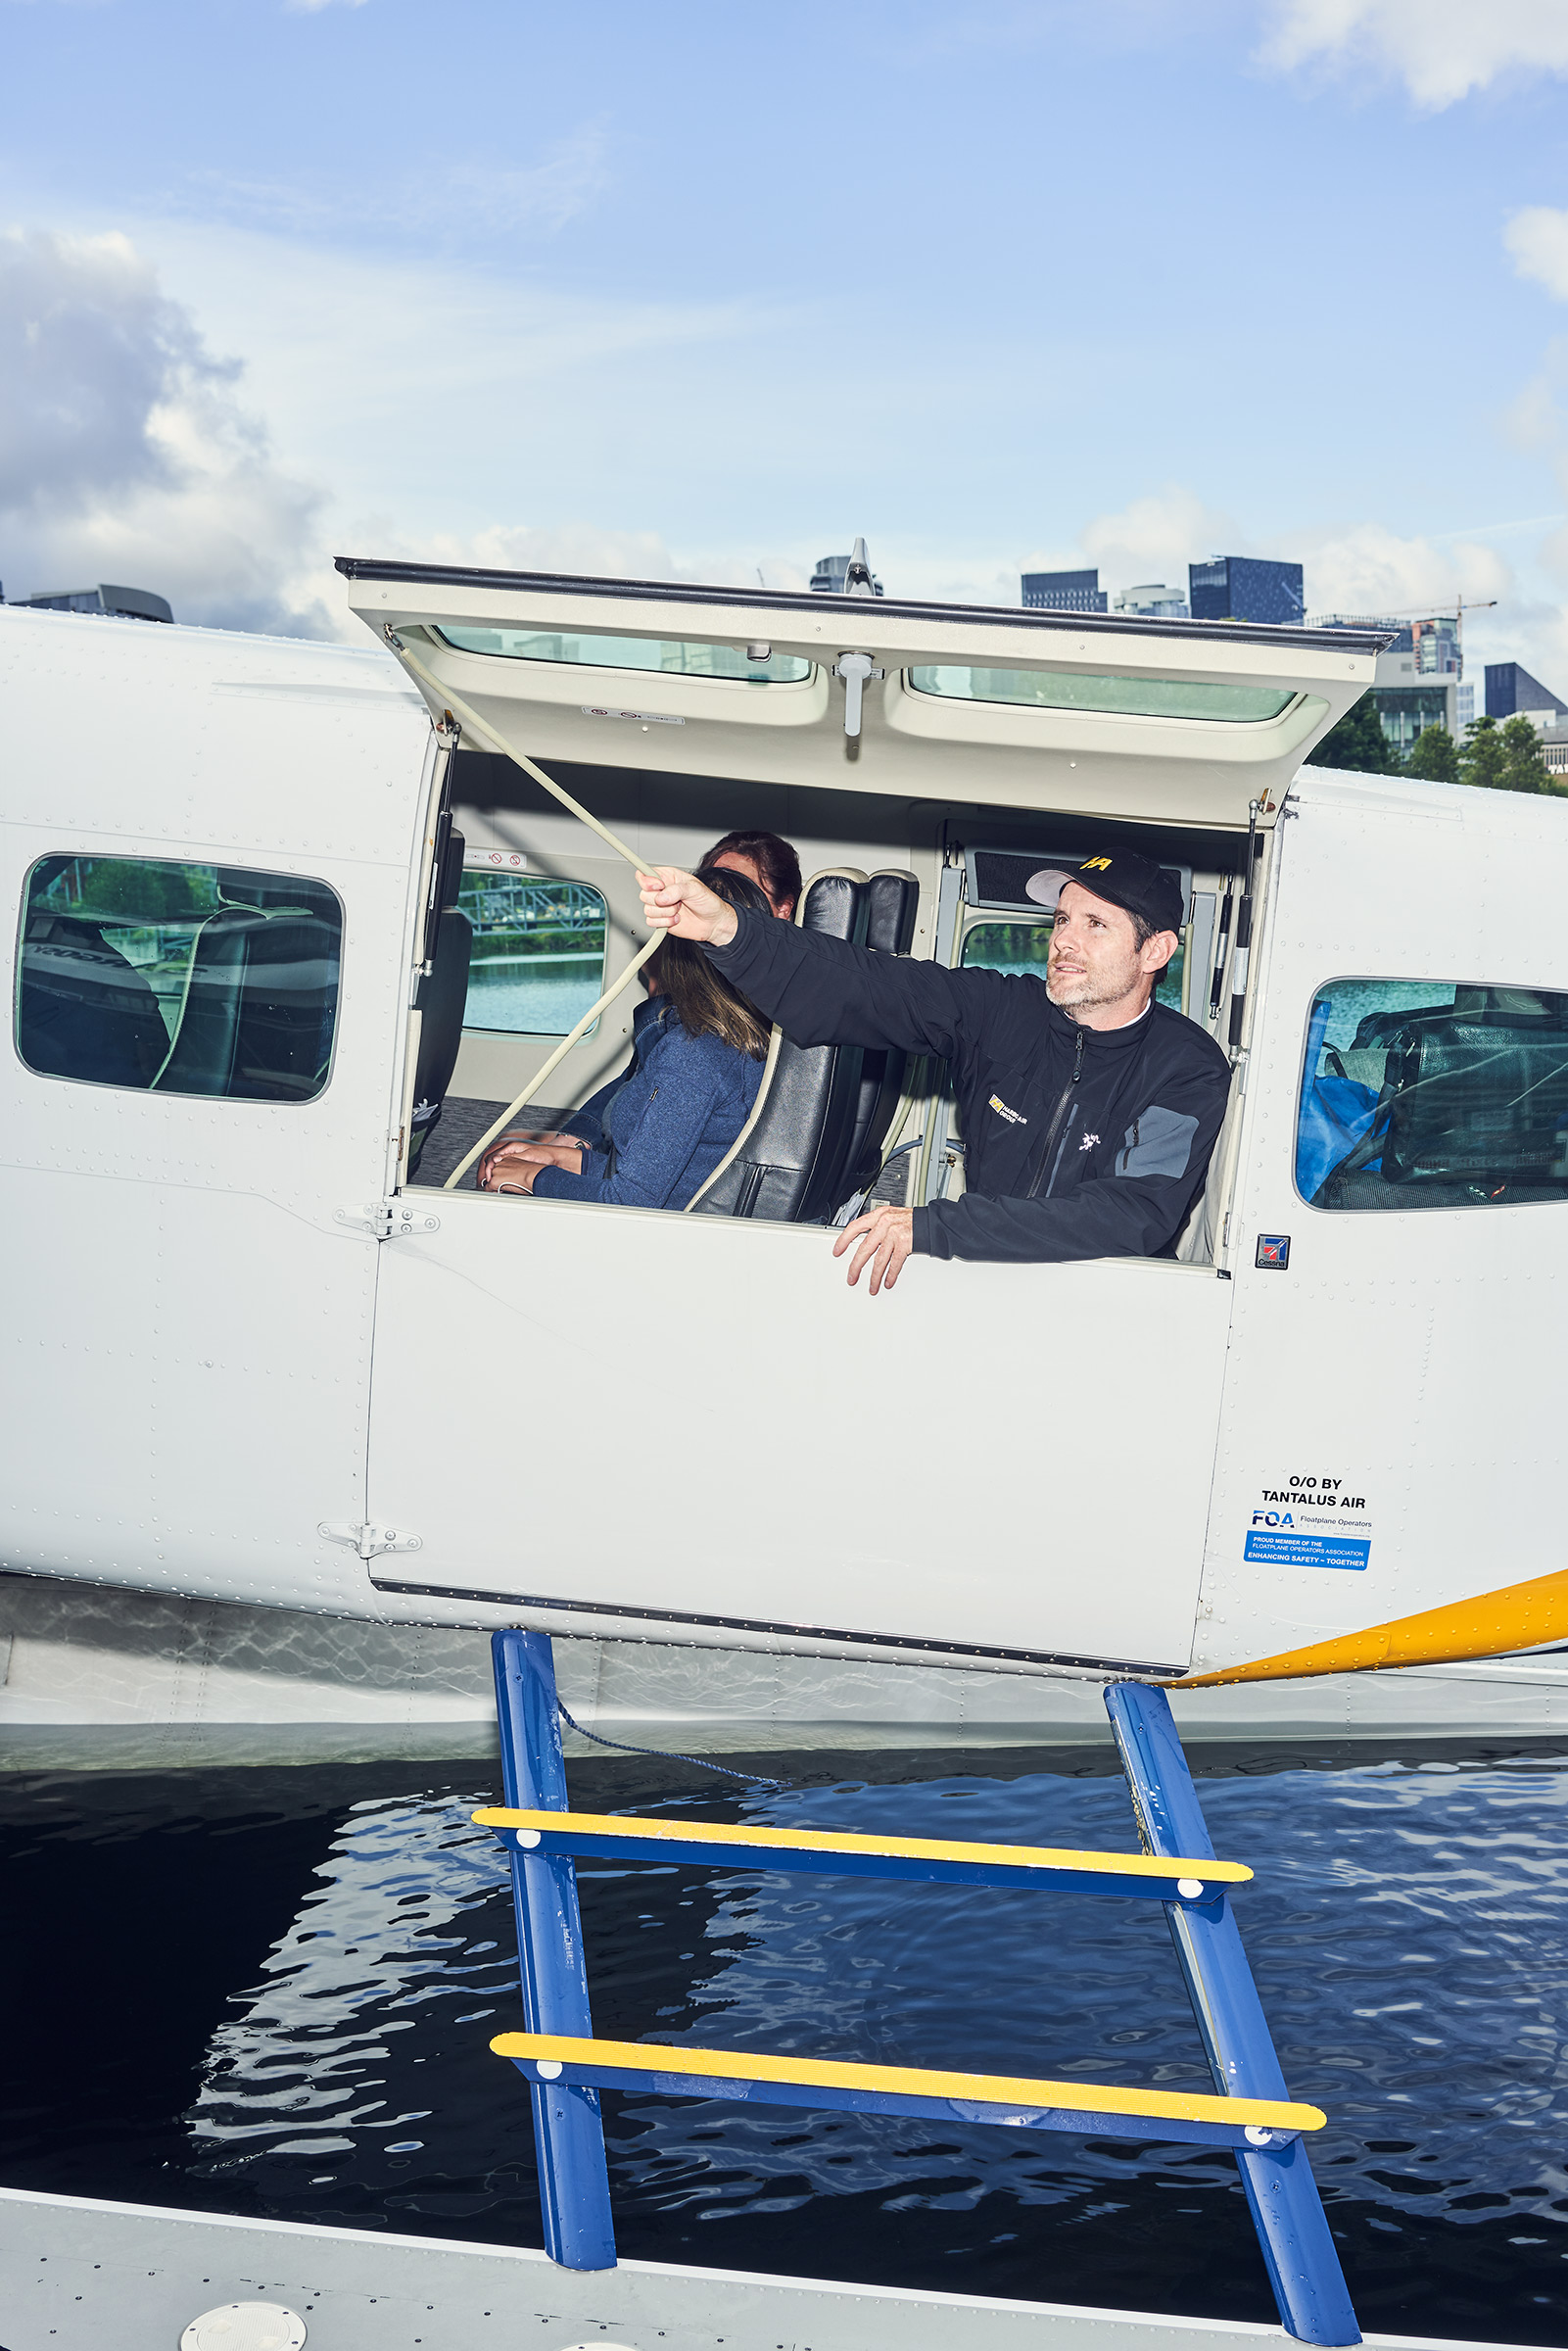 A Harbour Air crew member prepares for take-off on a seaplane flying from Seattle to Vancouver on July 11. When the Vancouver-Seattle route launched last year, tech companies bought tickets in bulk so their employees could go back and forth between Canada and the United States easily.